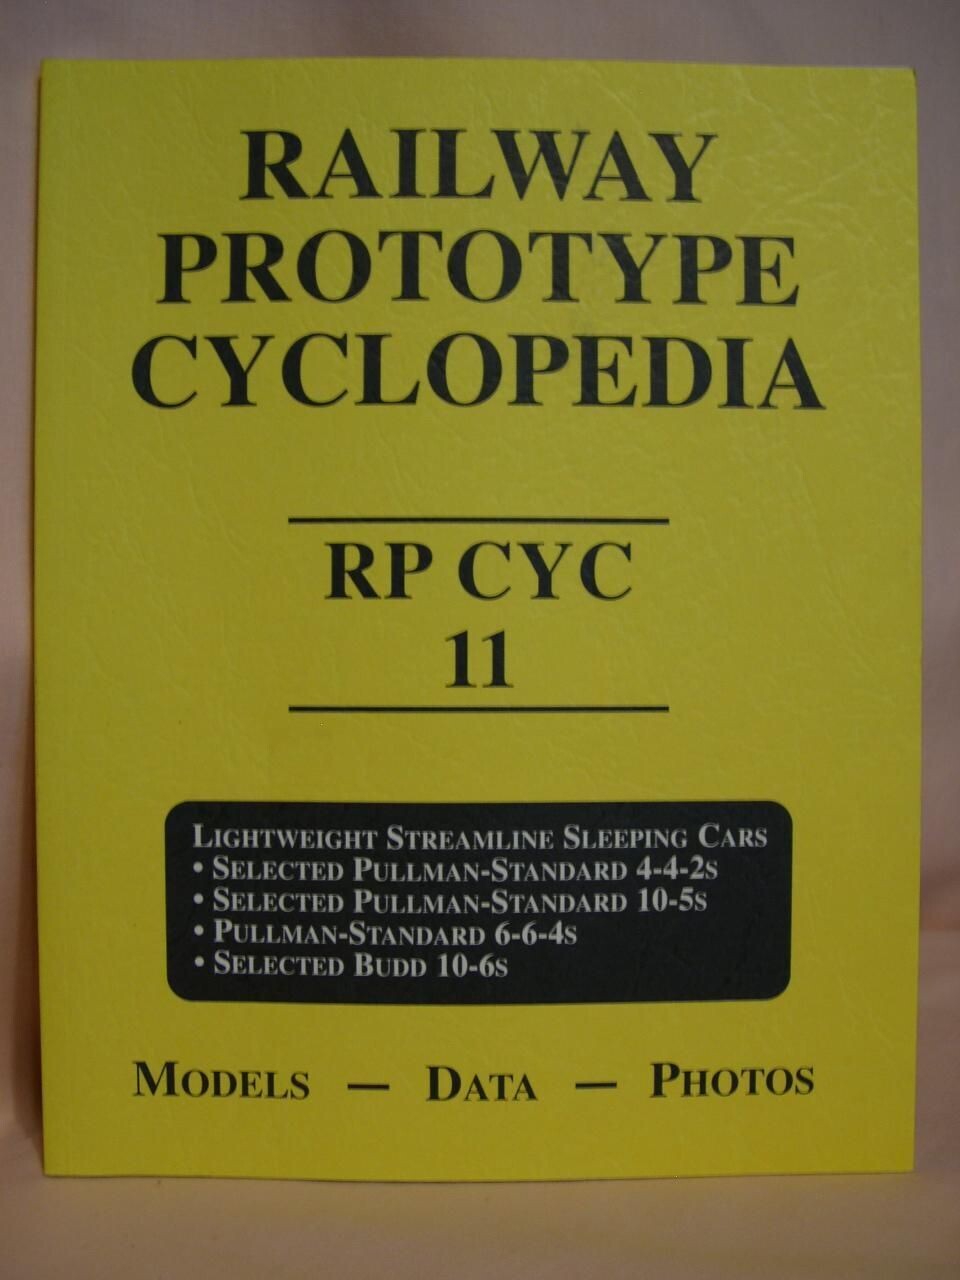 "RP-CYC; VOLUME 11" (only 1 available)